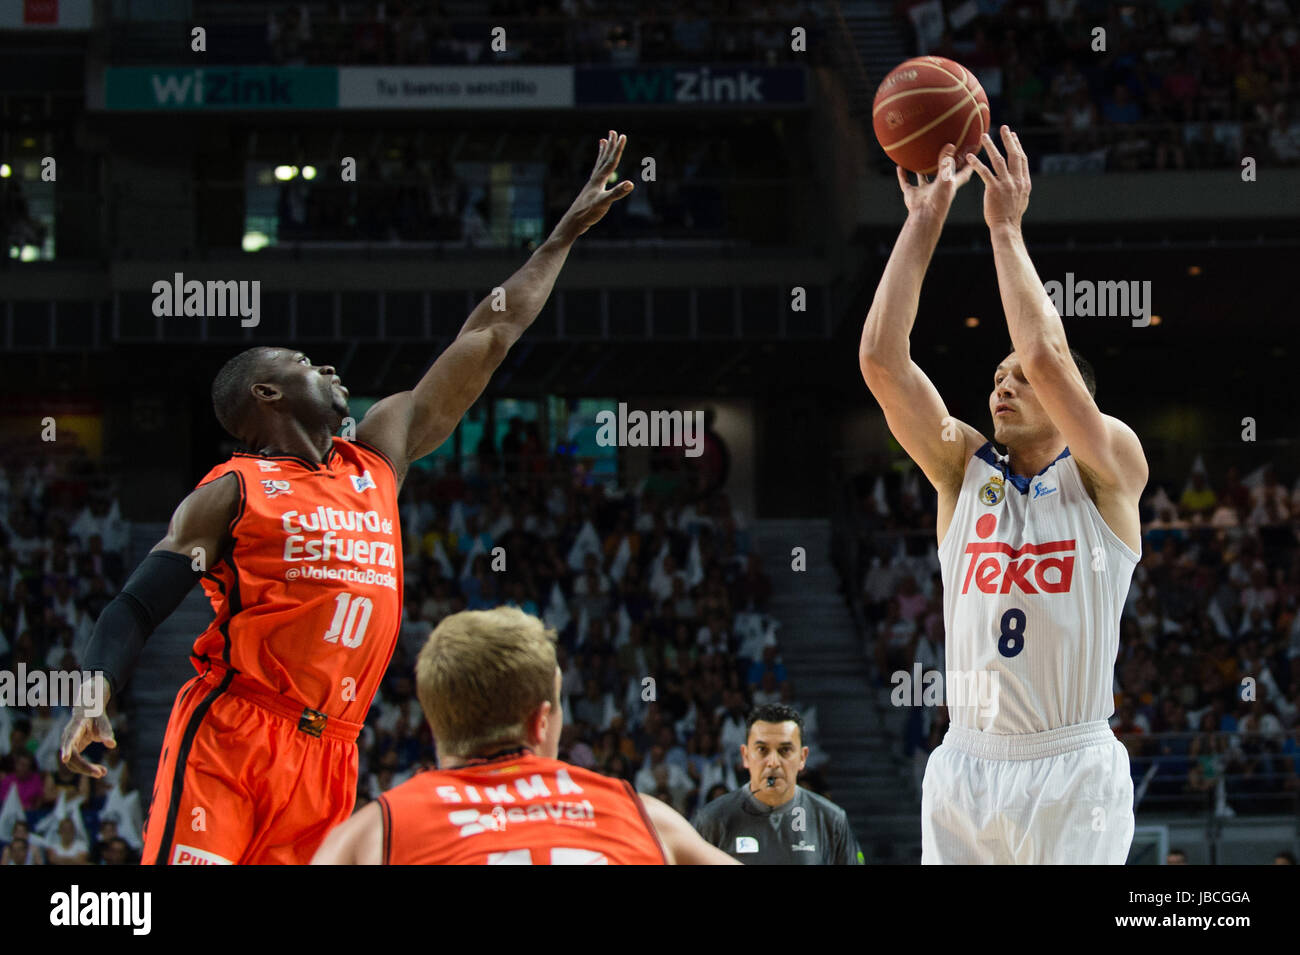 MADRID, ESPAÑA - 9 DE JUNIO DE 2017: Maciulis reliza un tiro ante Sato during the match between Real Madrid and Valencia Basket, corresponding to the first match of the playoff of the Endesa League final, played at the WiZink Center in Madrid. Stock Photo